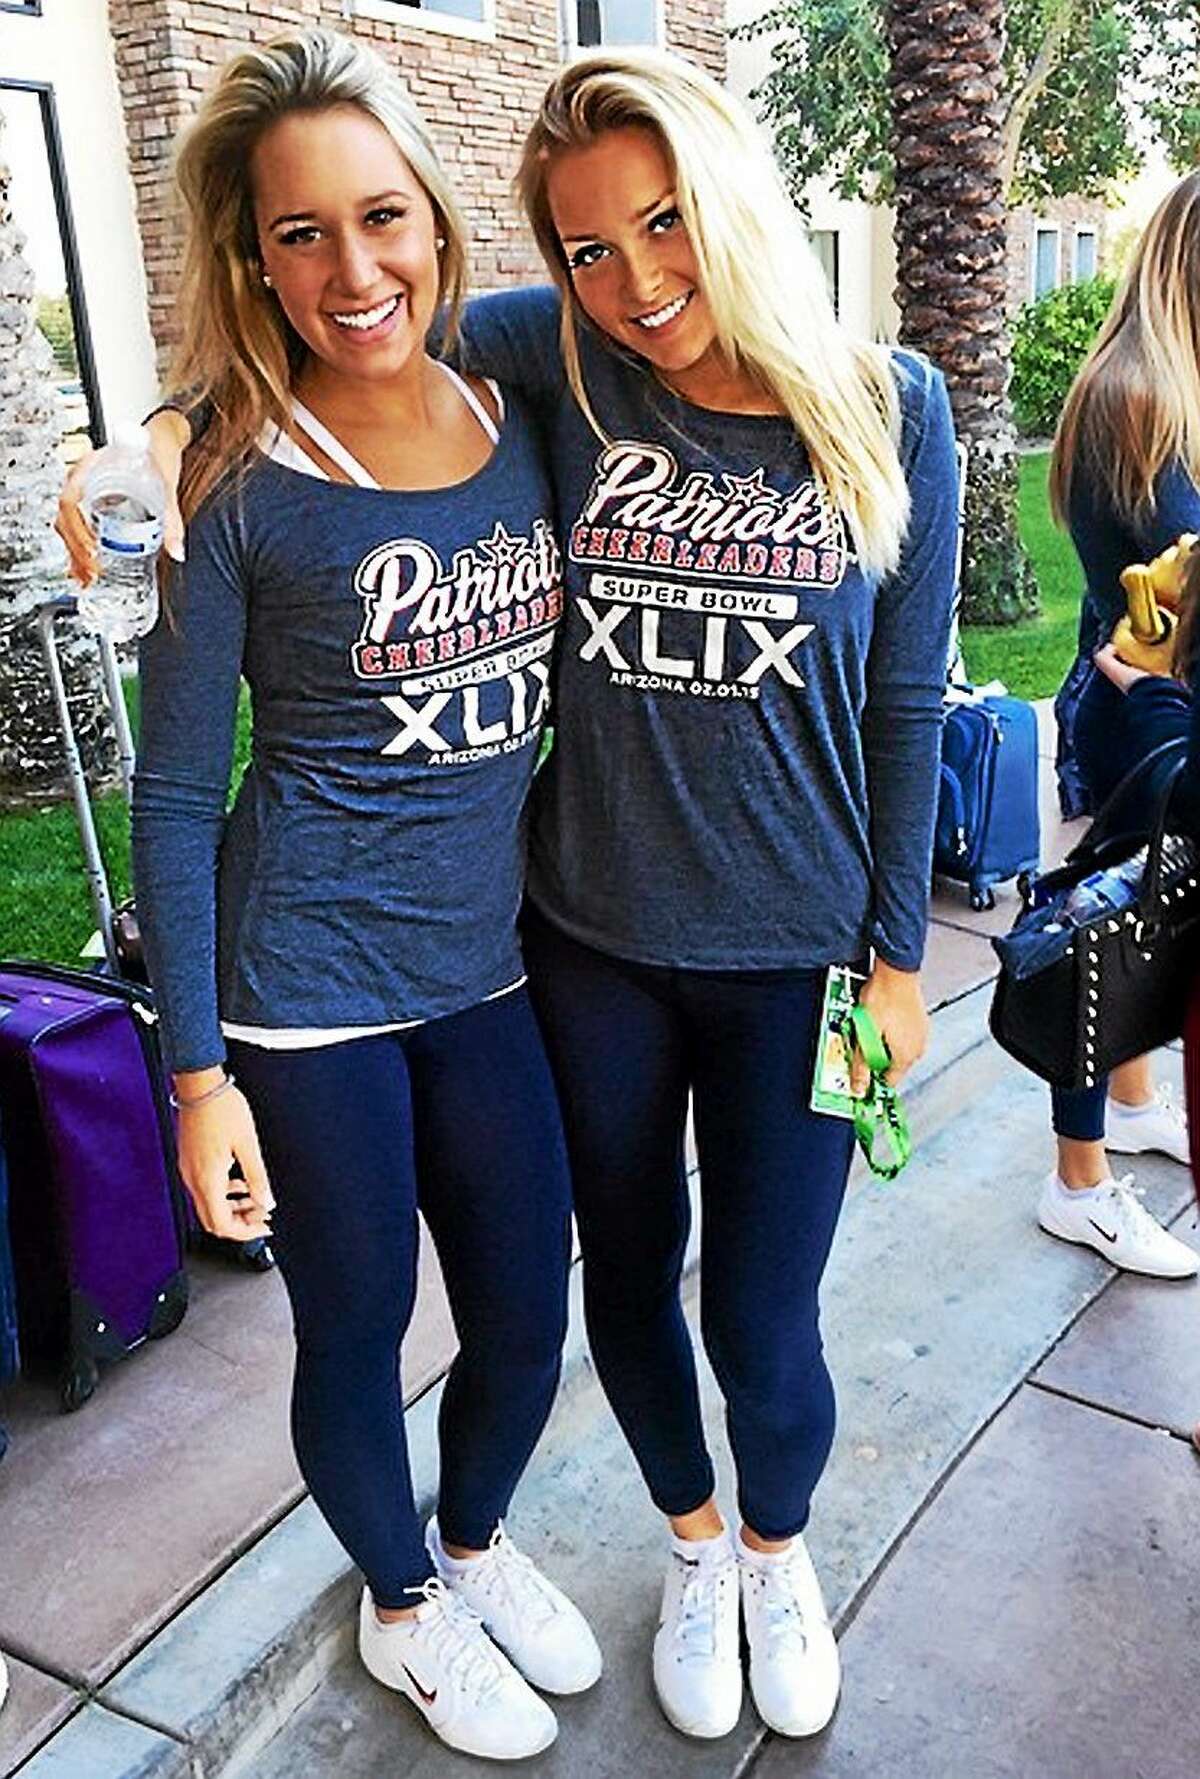 Patriot's cheerleaders Brittany Dickie left and Camille Kostek, right, of Killingworth from their photo on Instagram.